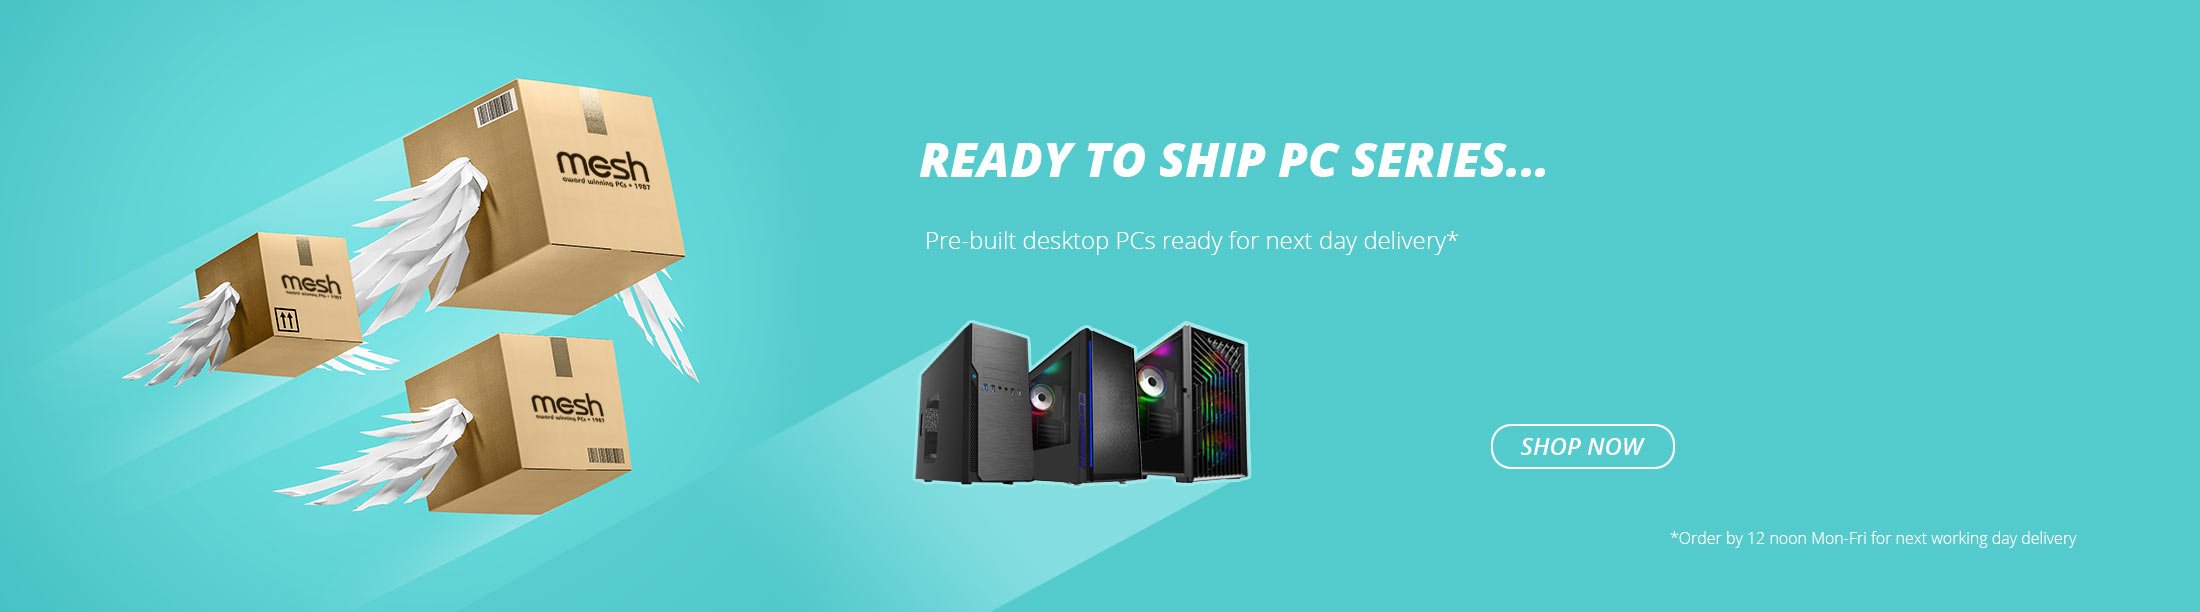 Ready To Ship PC Series - Pre-built and ready for next day delivery!